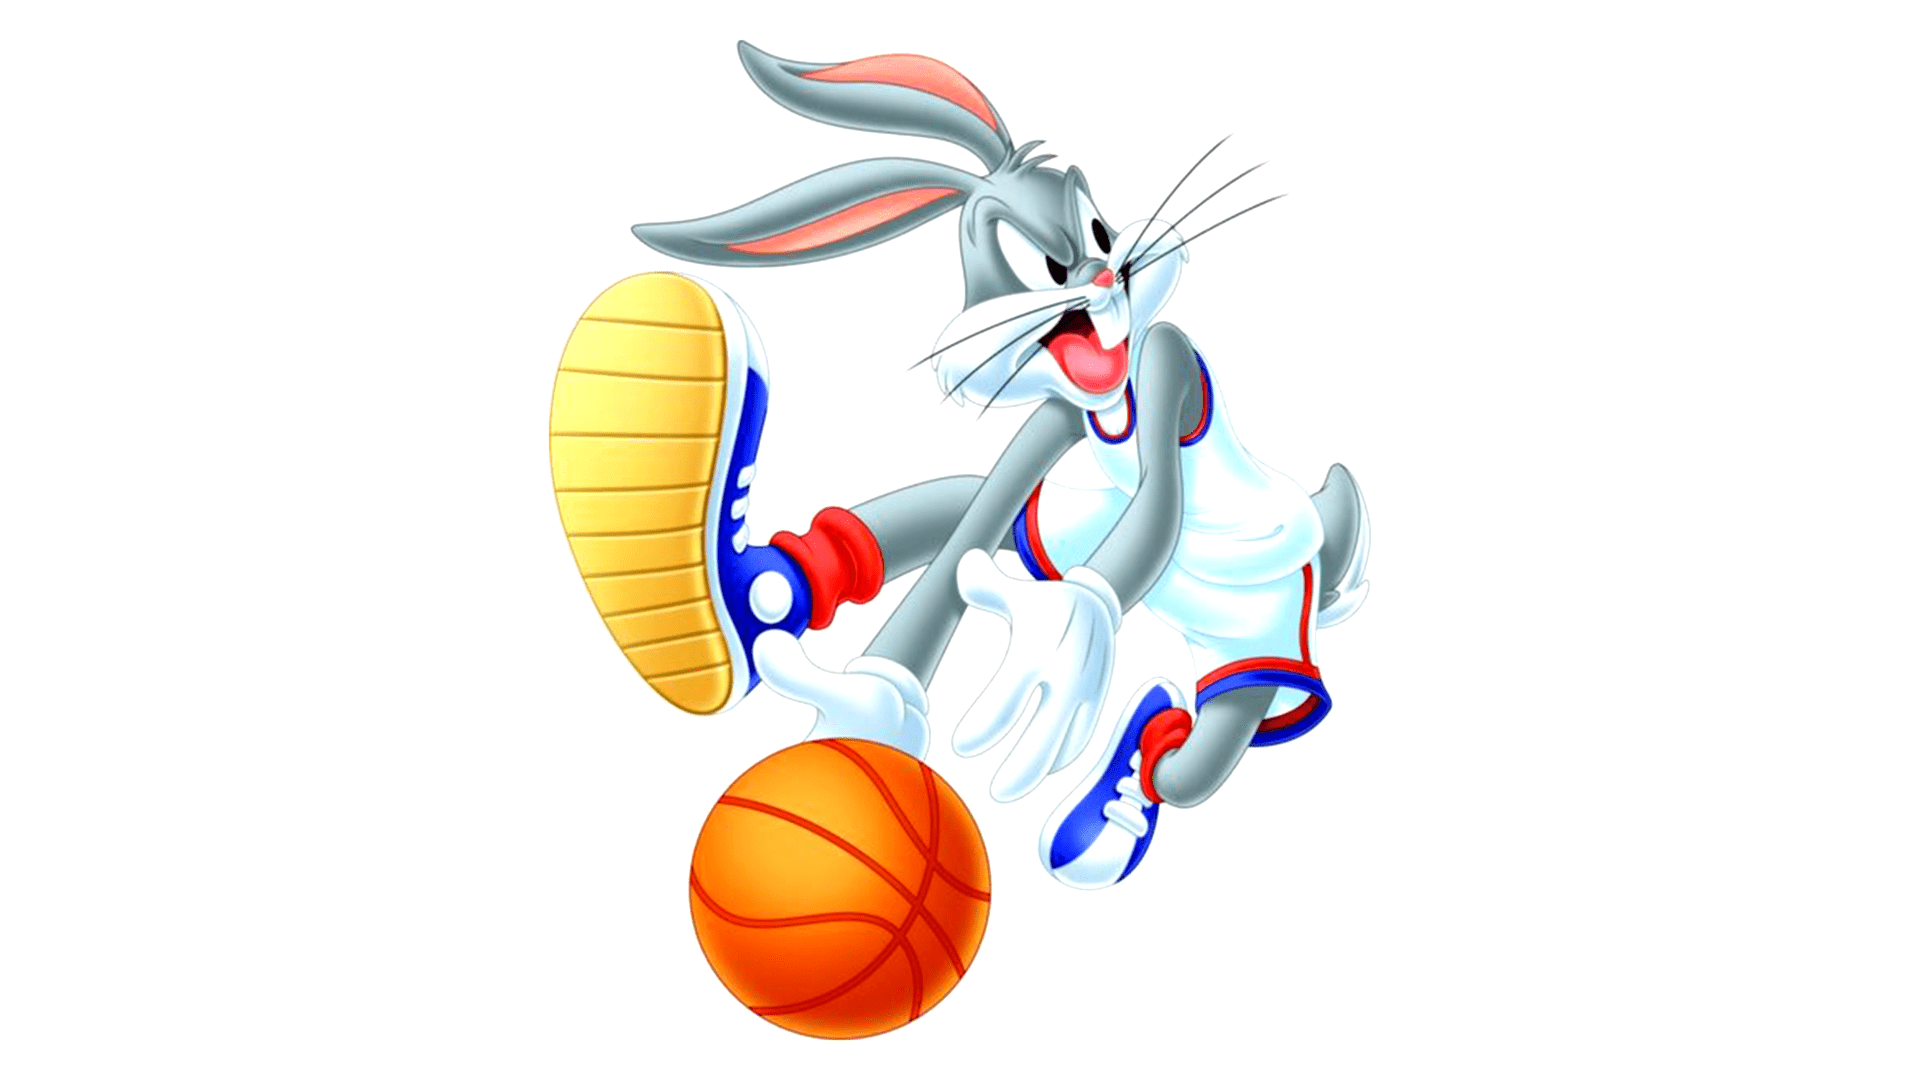 Bugs Bunny Basketball Wallpapers - You can also upload and share your